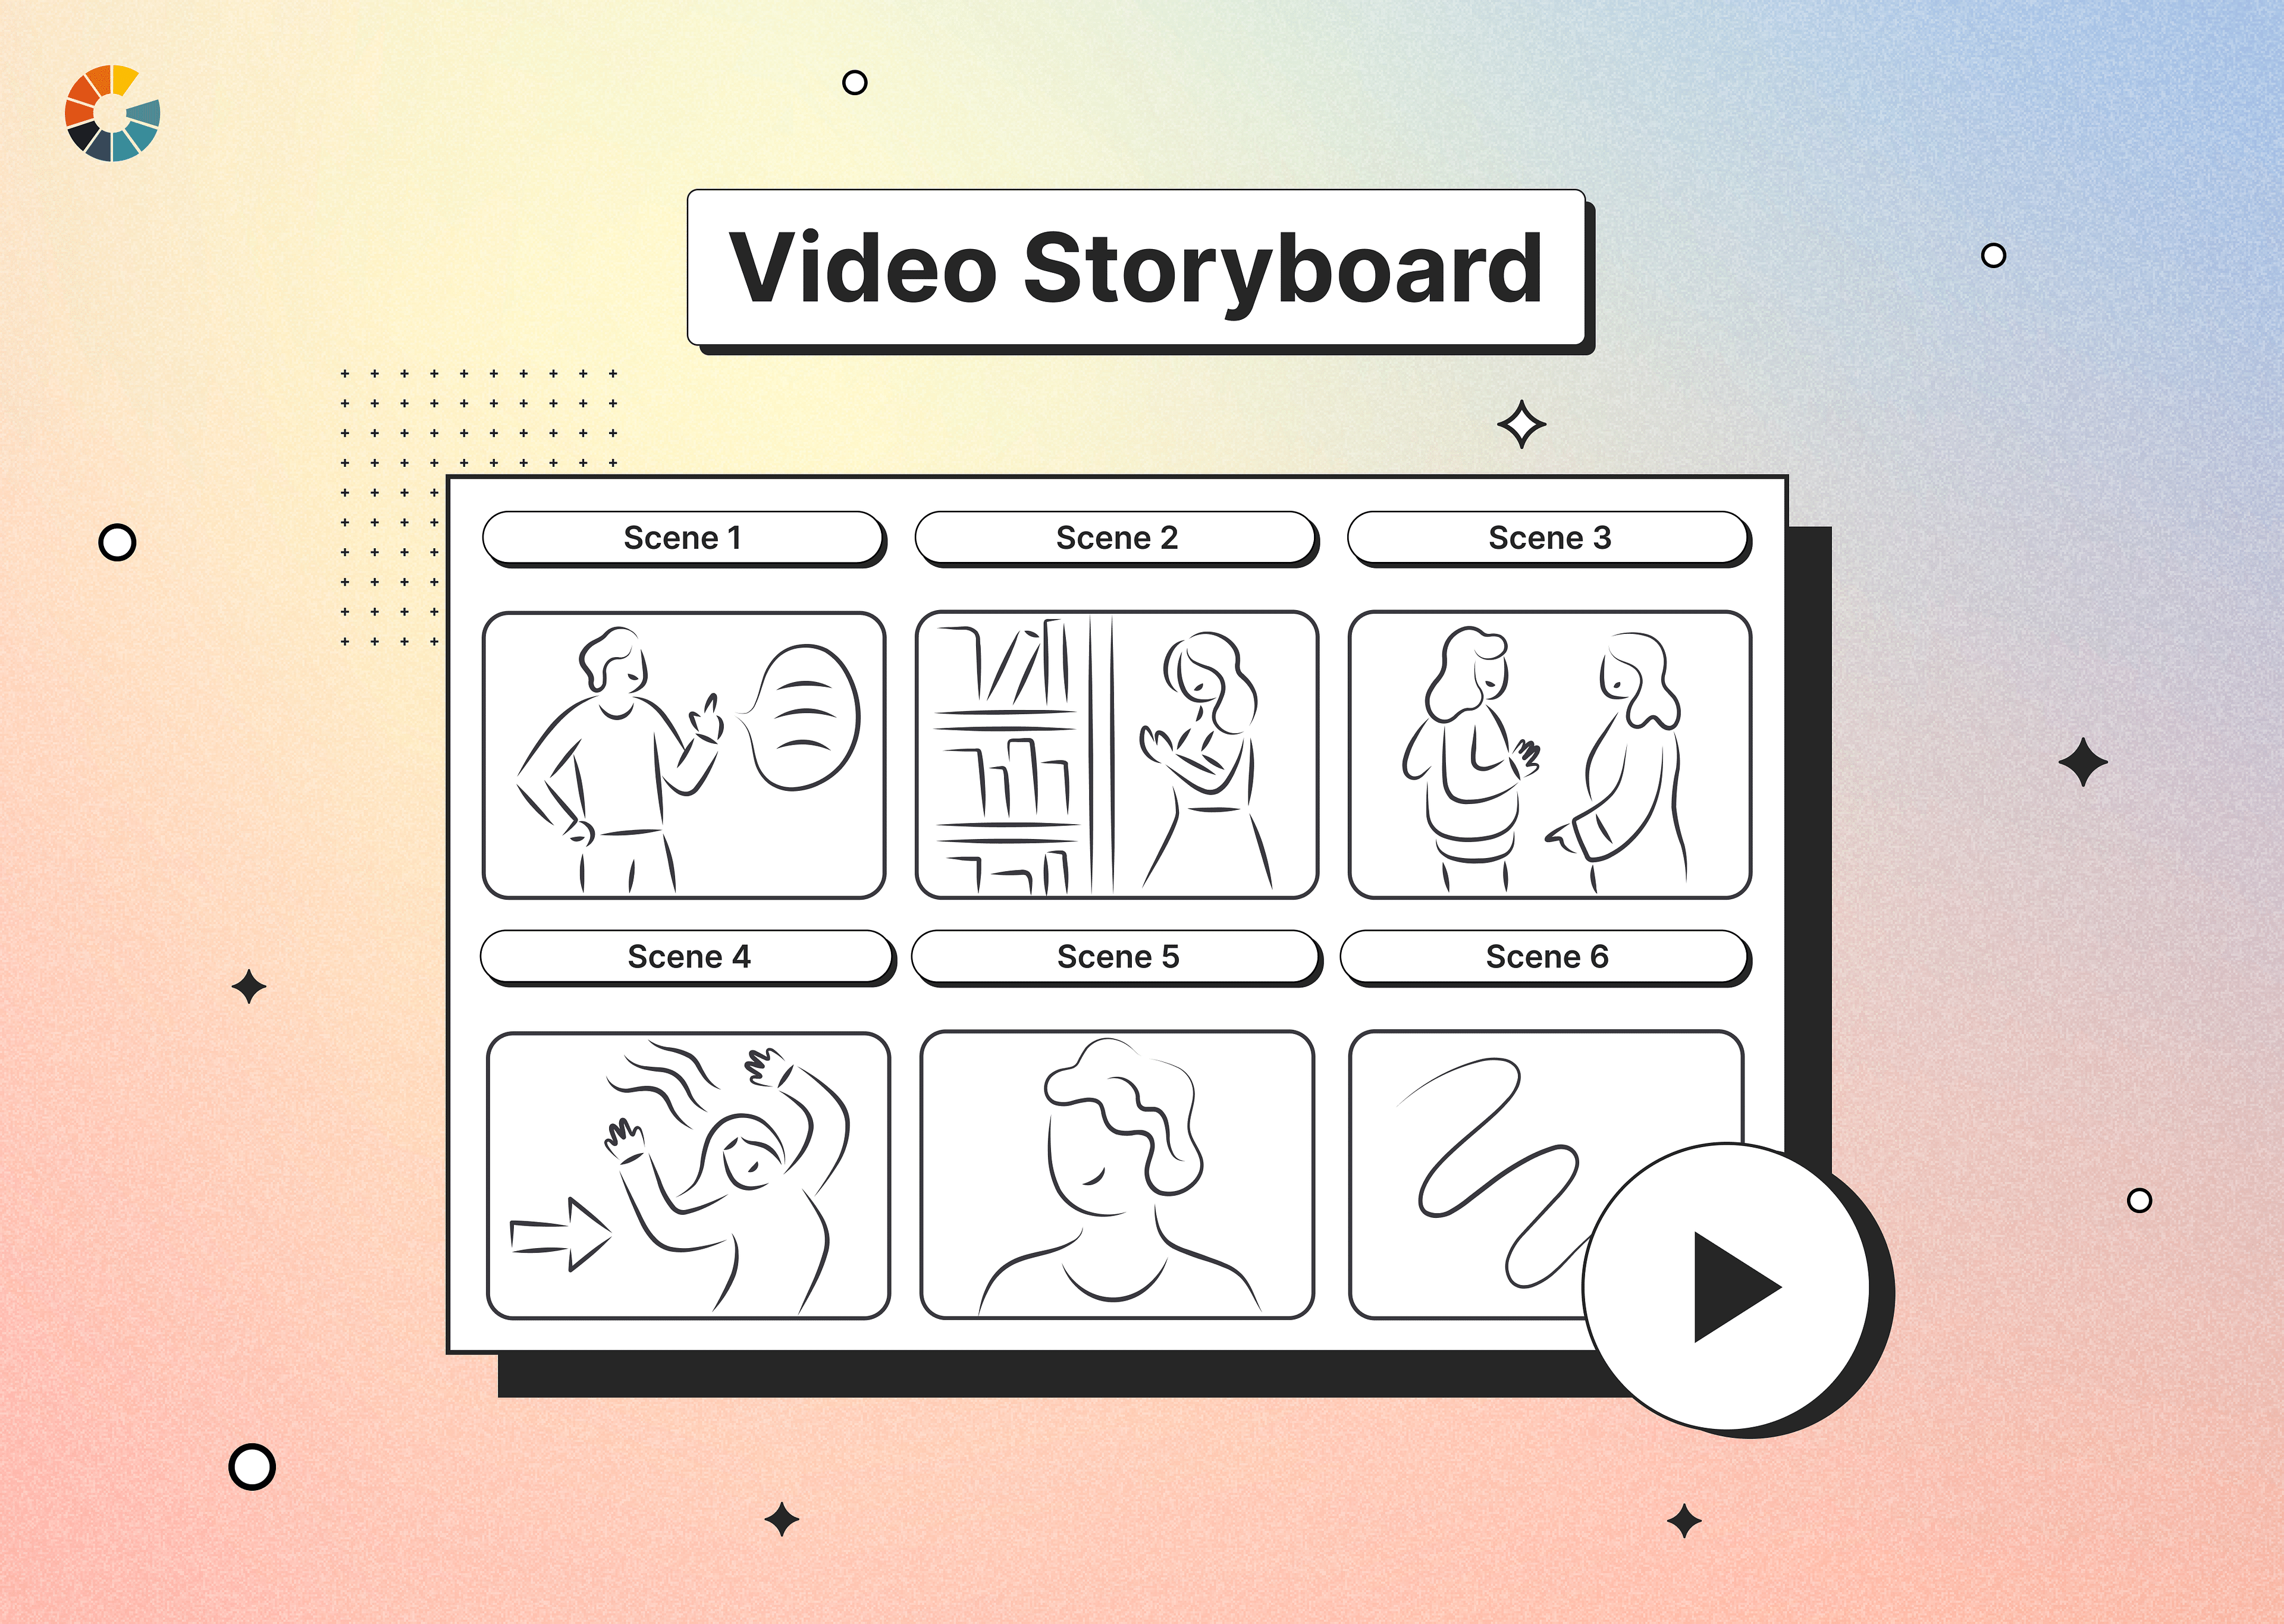 Video Storyboard: How to create a storyboard for a video?